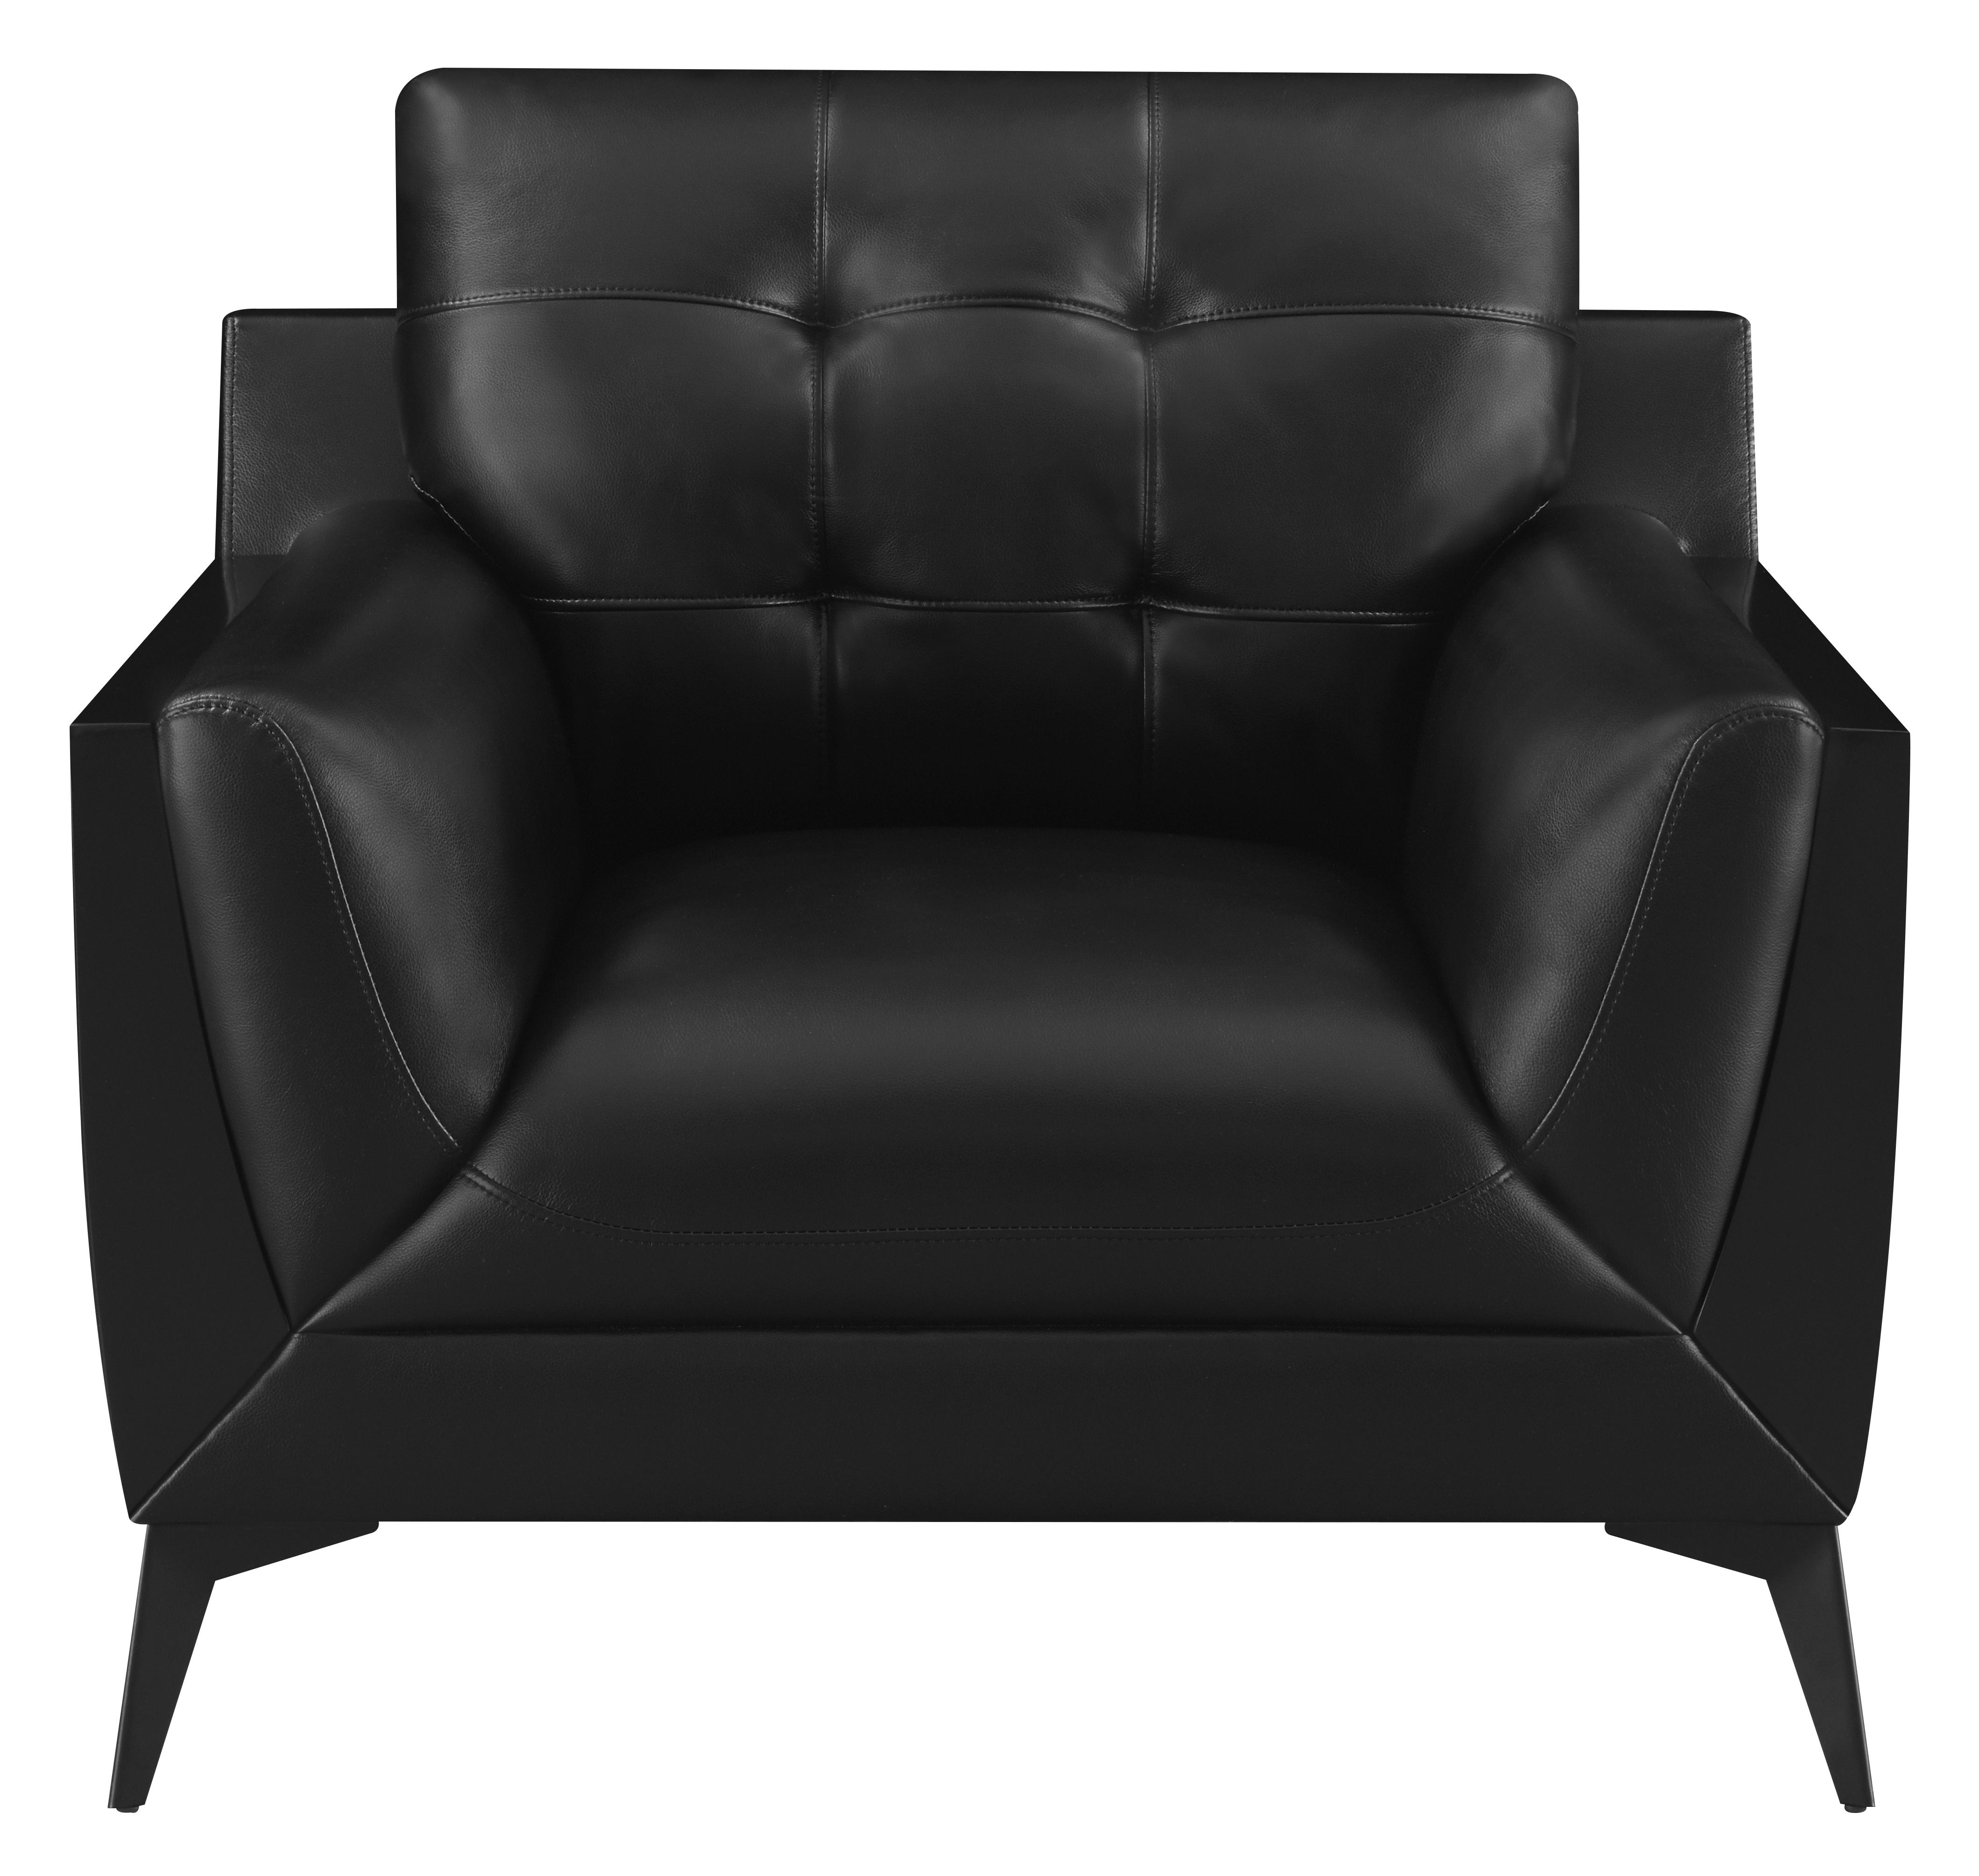 

    
Contemporary Black Leatherette Arm Chair Coaster 511133 Moira
